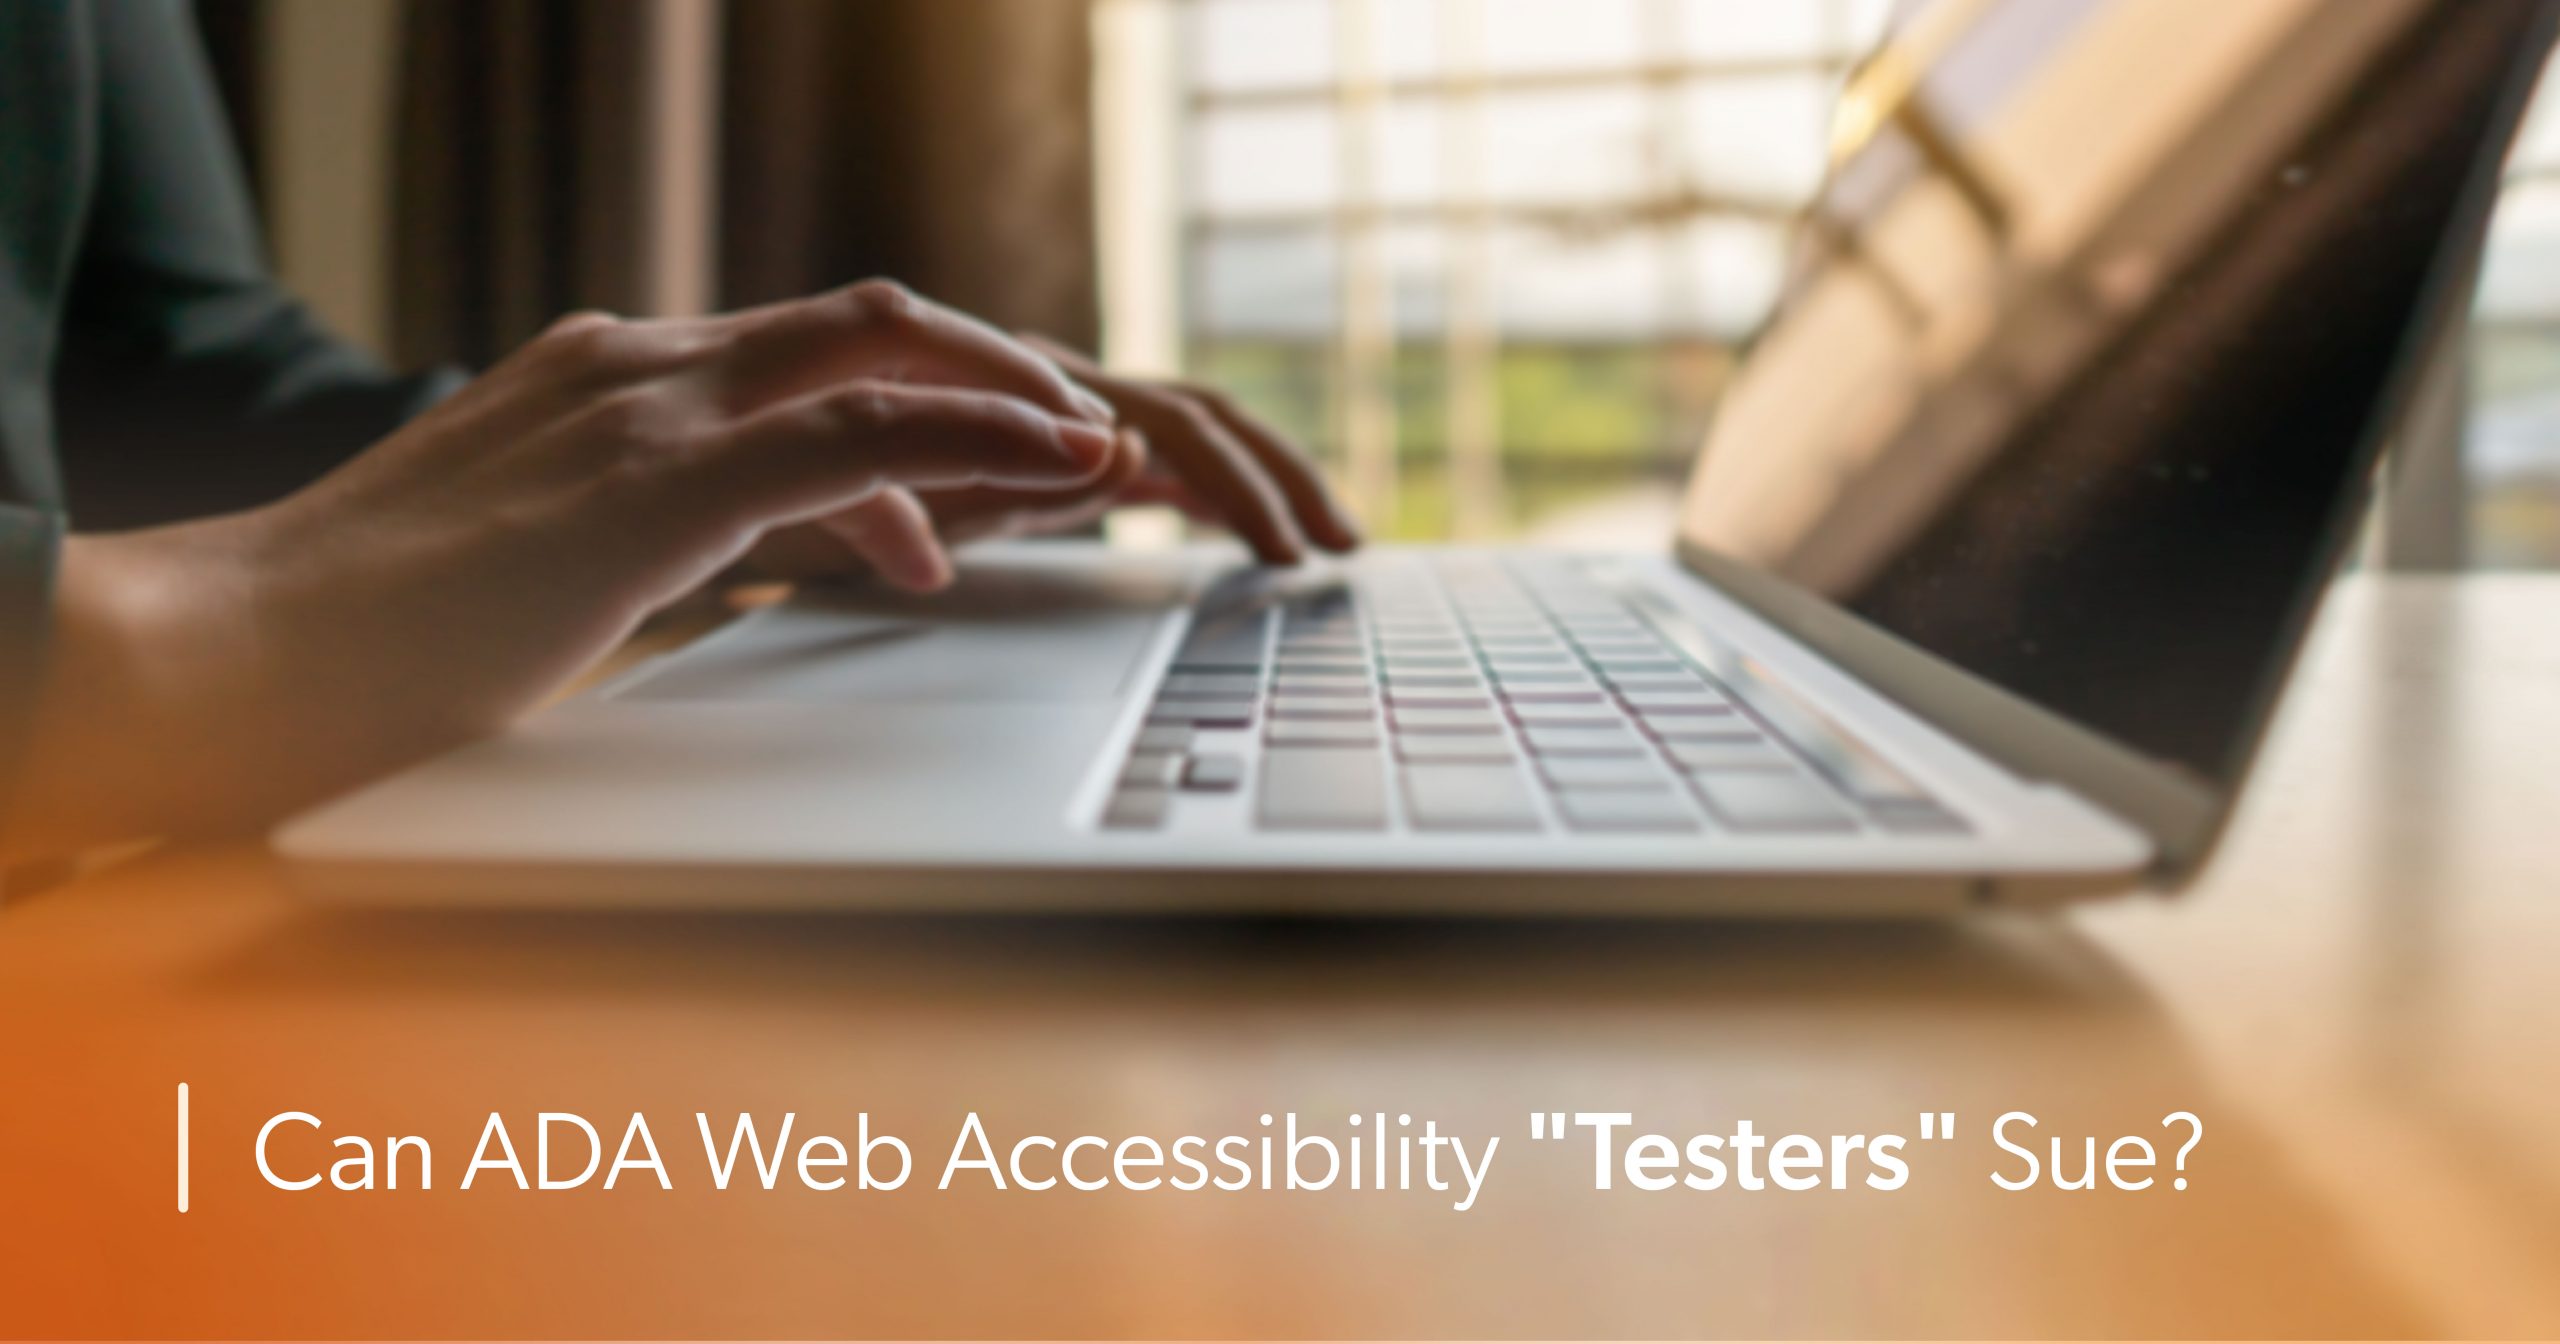 Can ADA Web Accessibility “Testers” Sue?